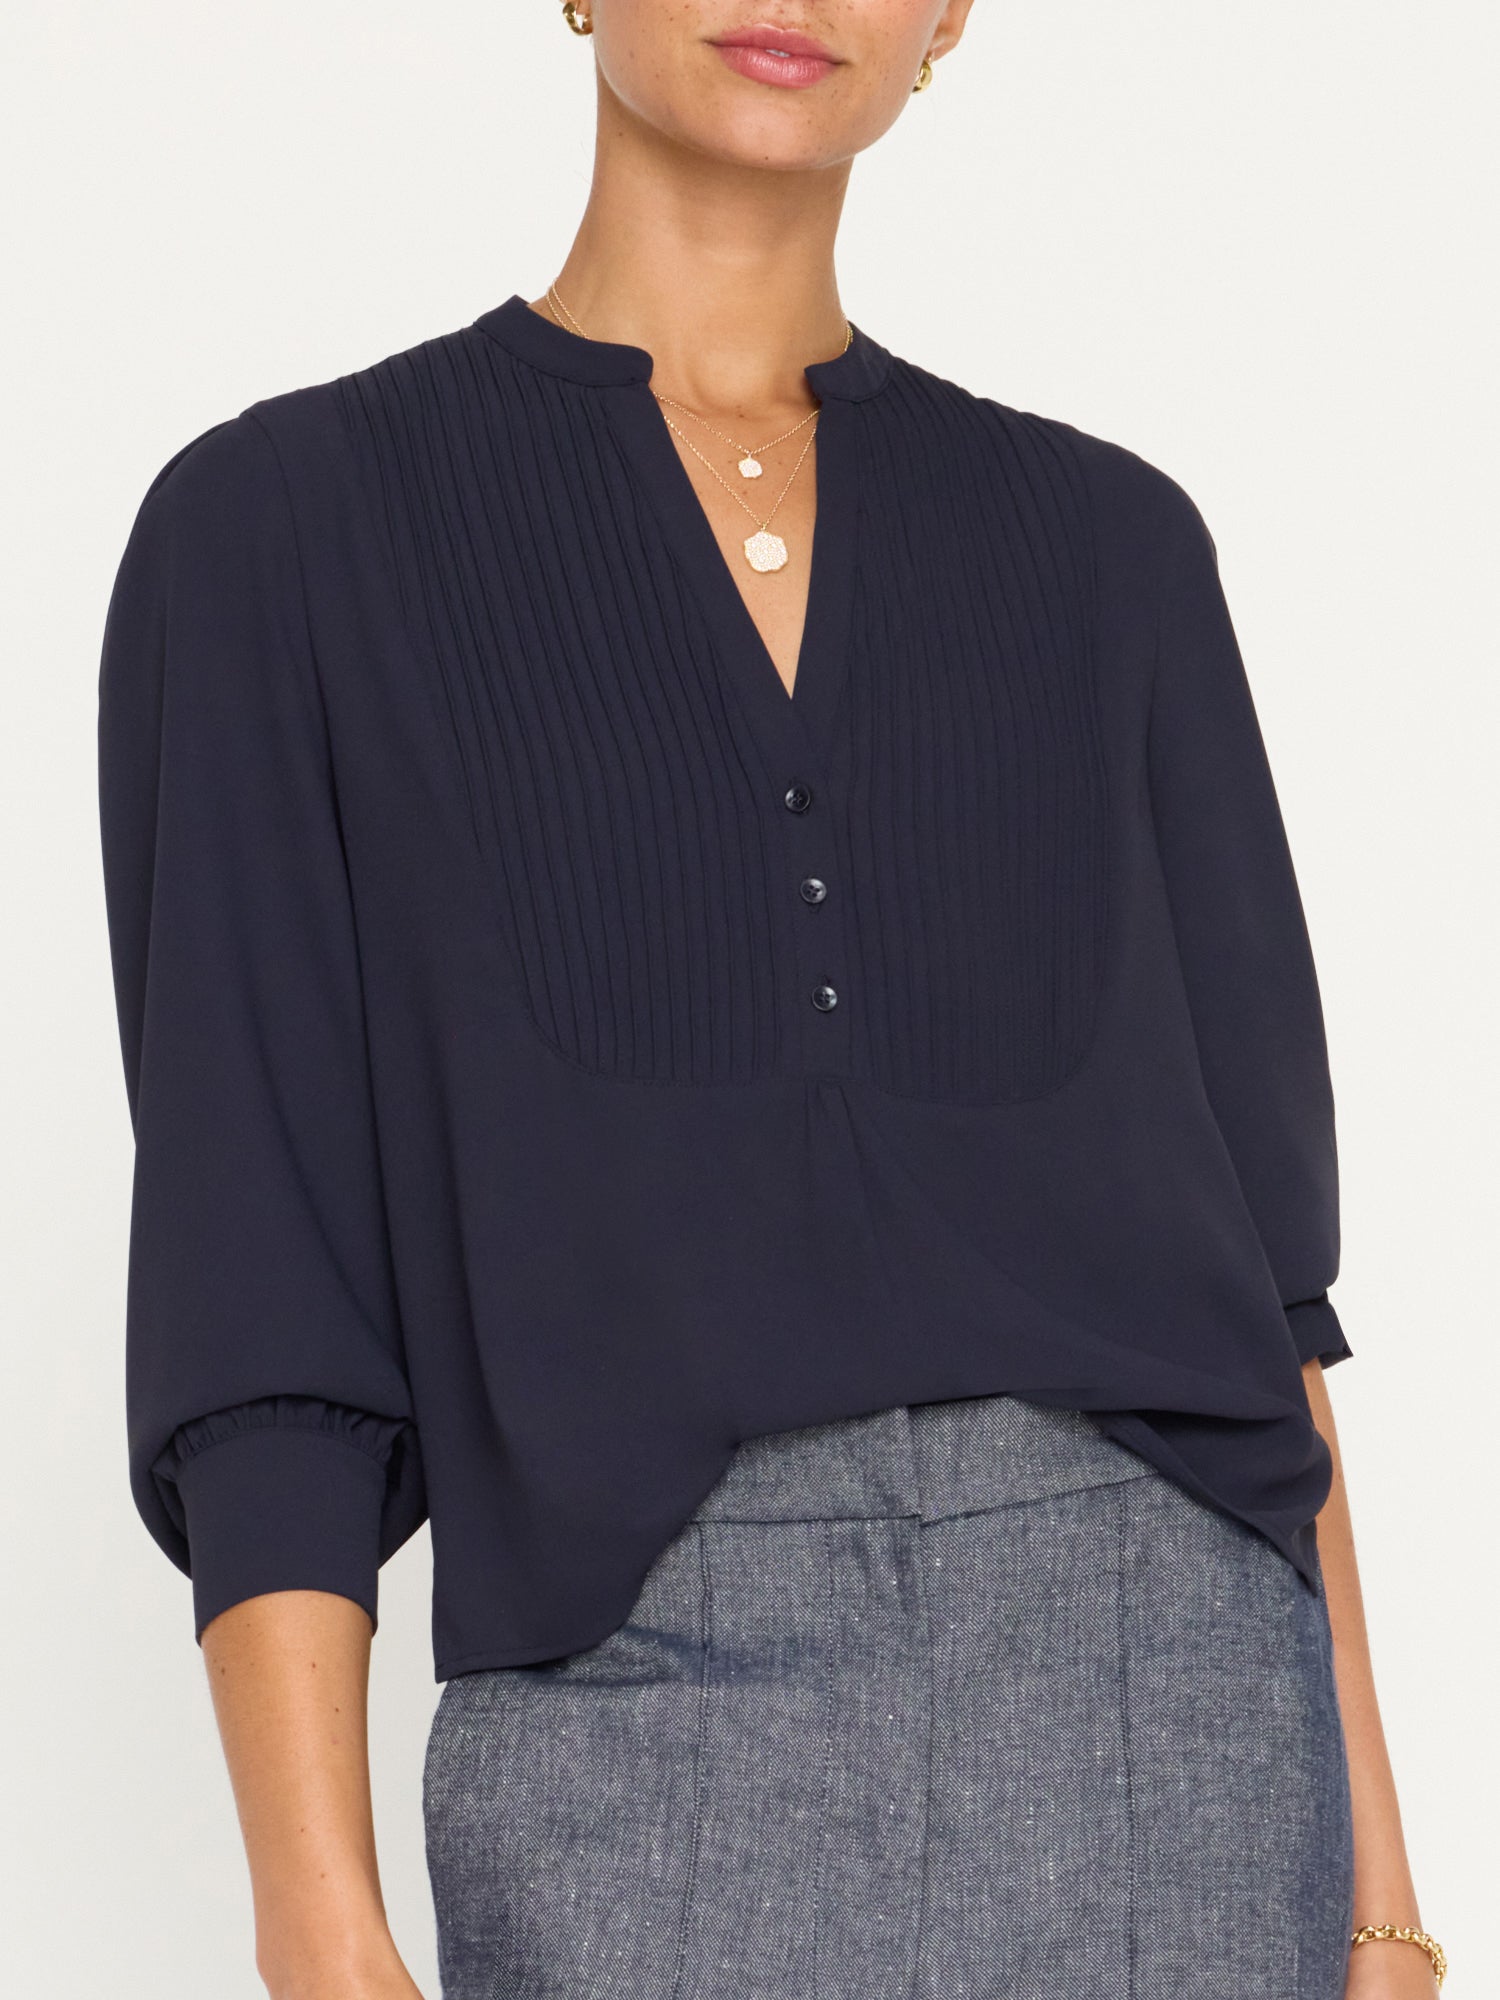 Lora navy v neck three quarter sleeve blouse front view 2